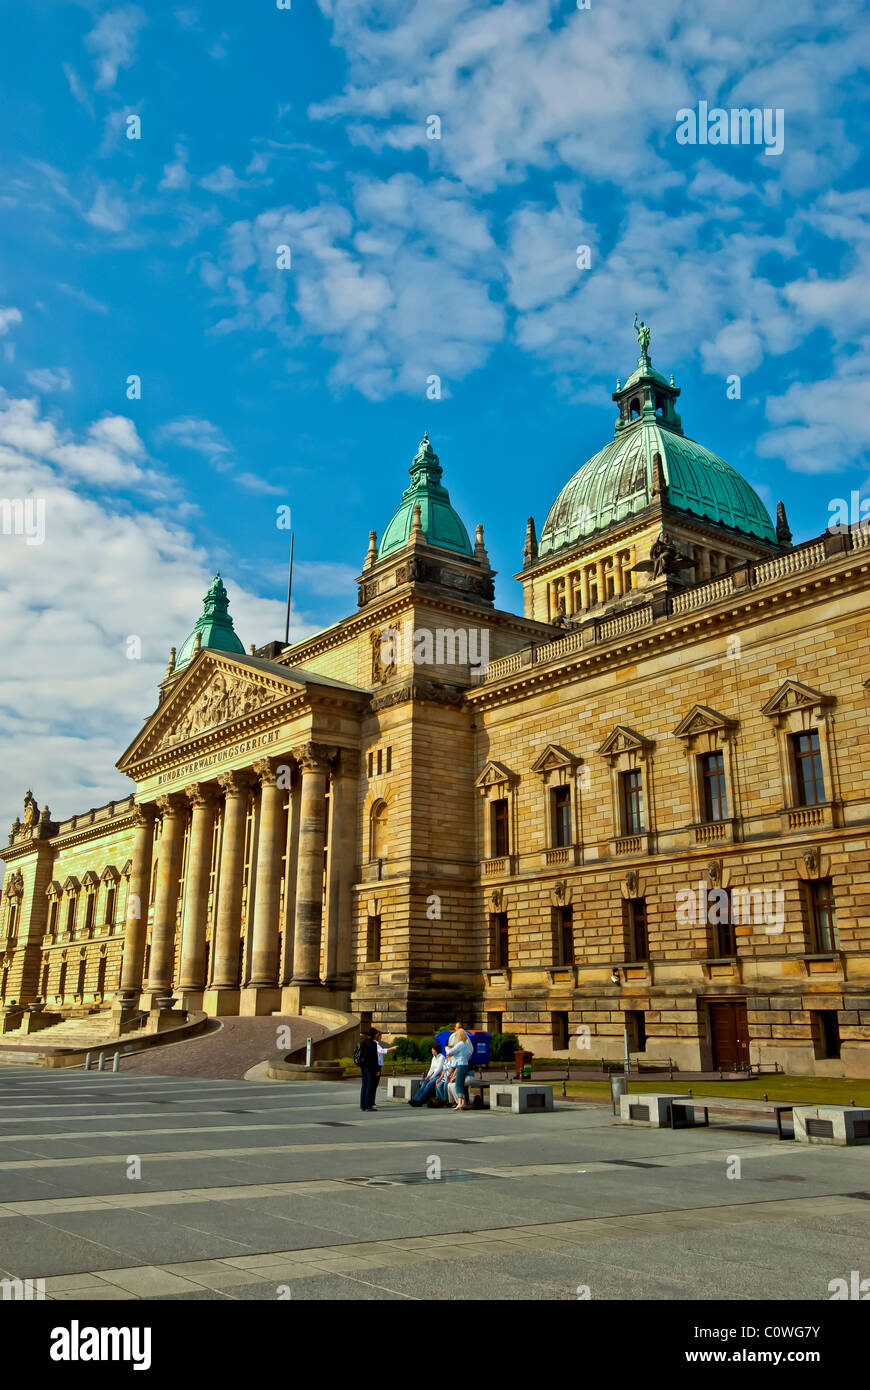 Federal Administrative Court or German Supreme Court building, Leipzig, Germany Stock Photo